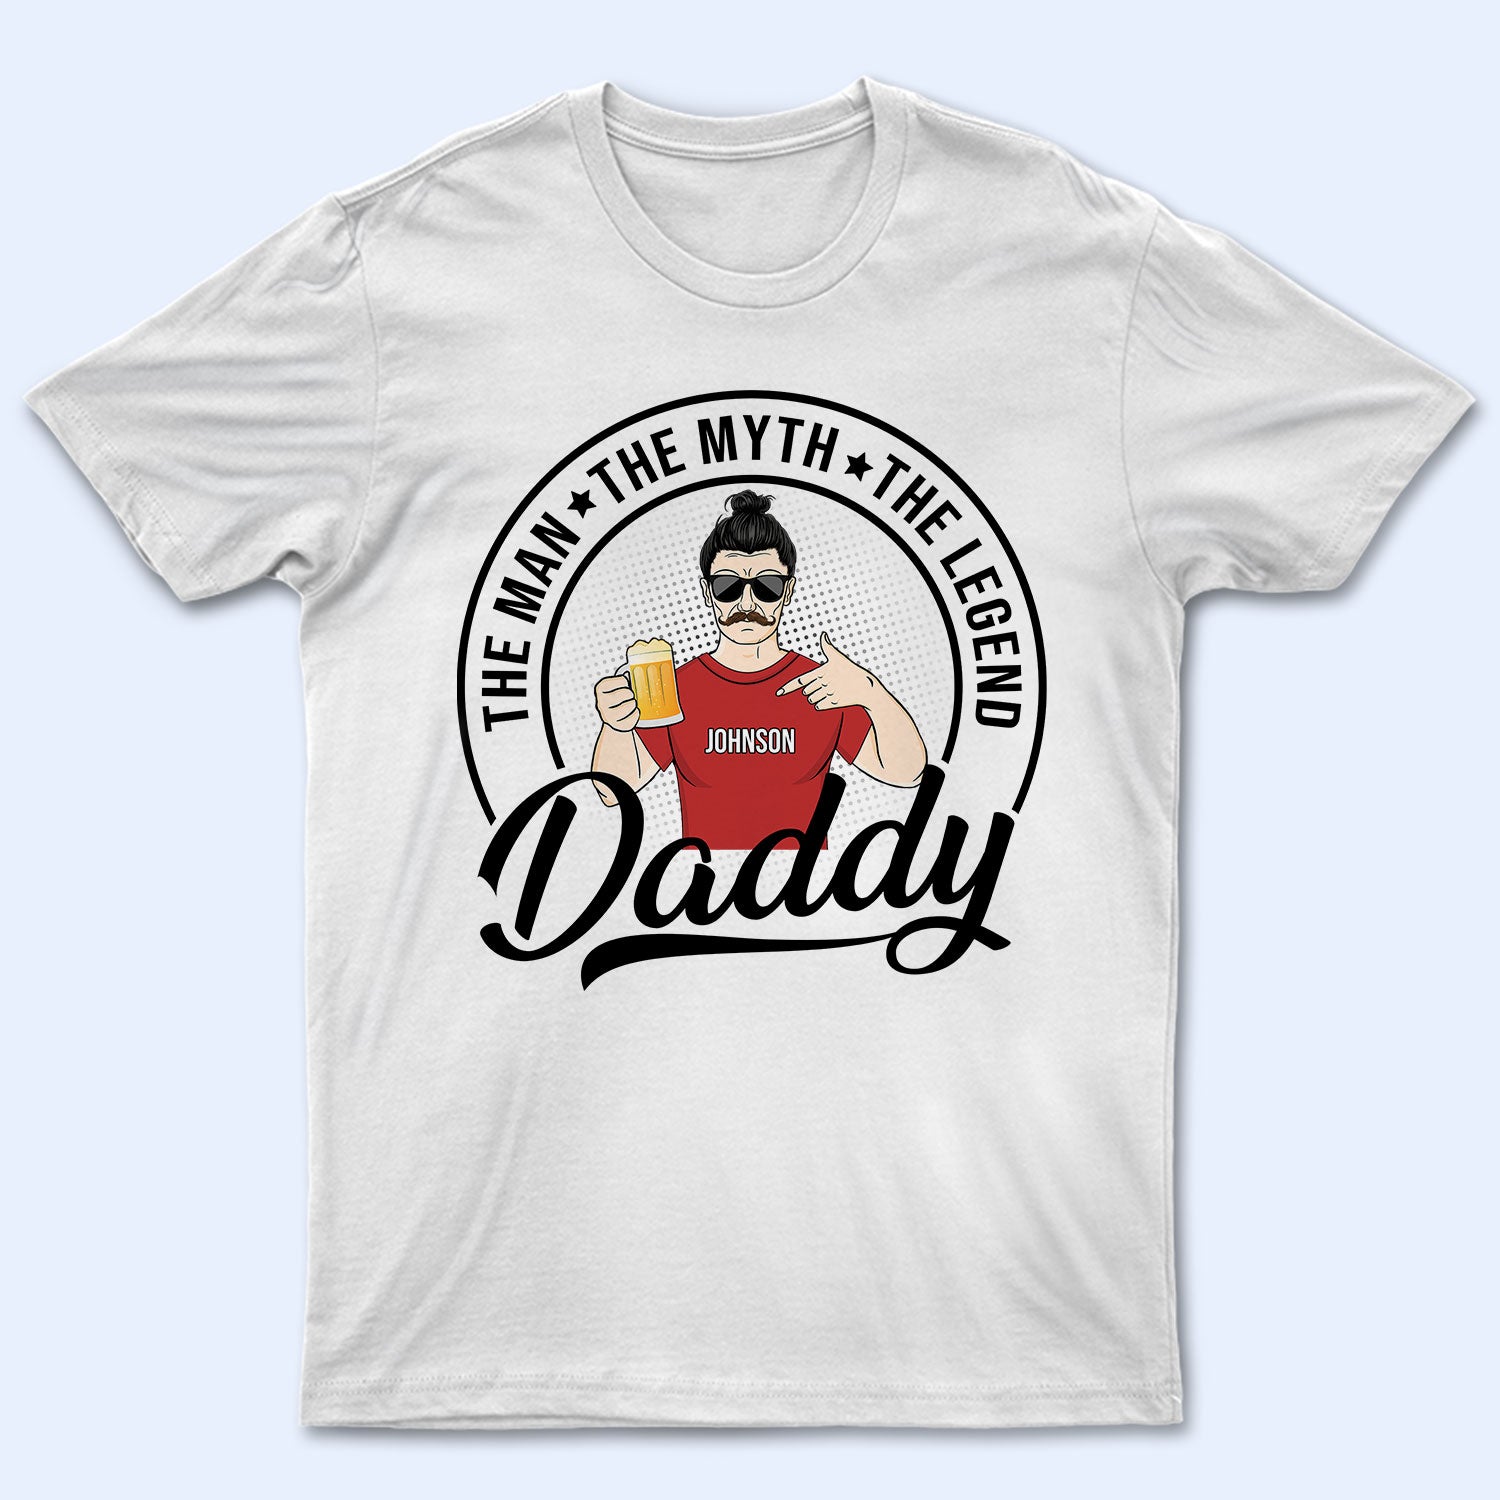 Daddy The Man The Myth The Legend - Birthday, Loving Gift For Dad, Father, Grandpa, Grandfather, Men, Yourself - Personalized Custom T Shirt